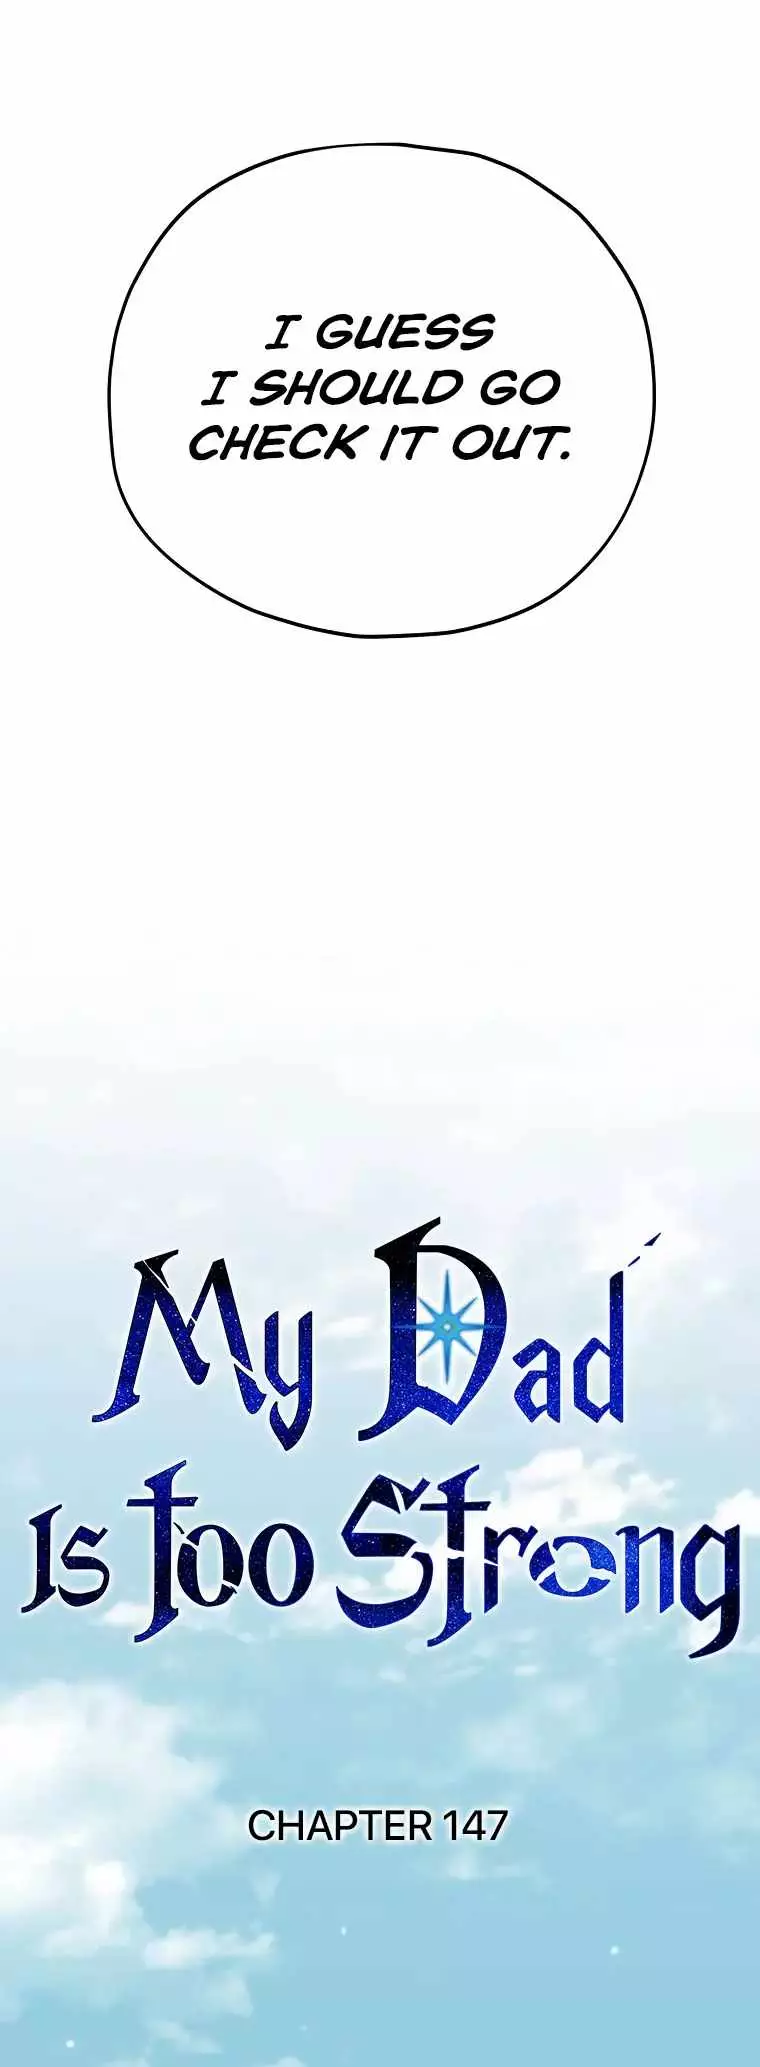 My Dad Is Too Strong - 147 page 8-416d4b31